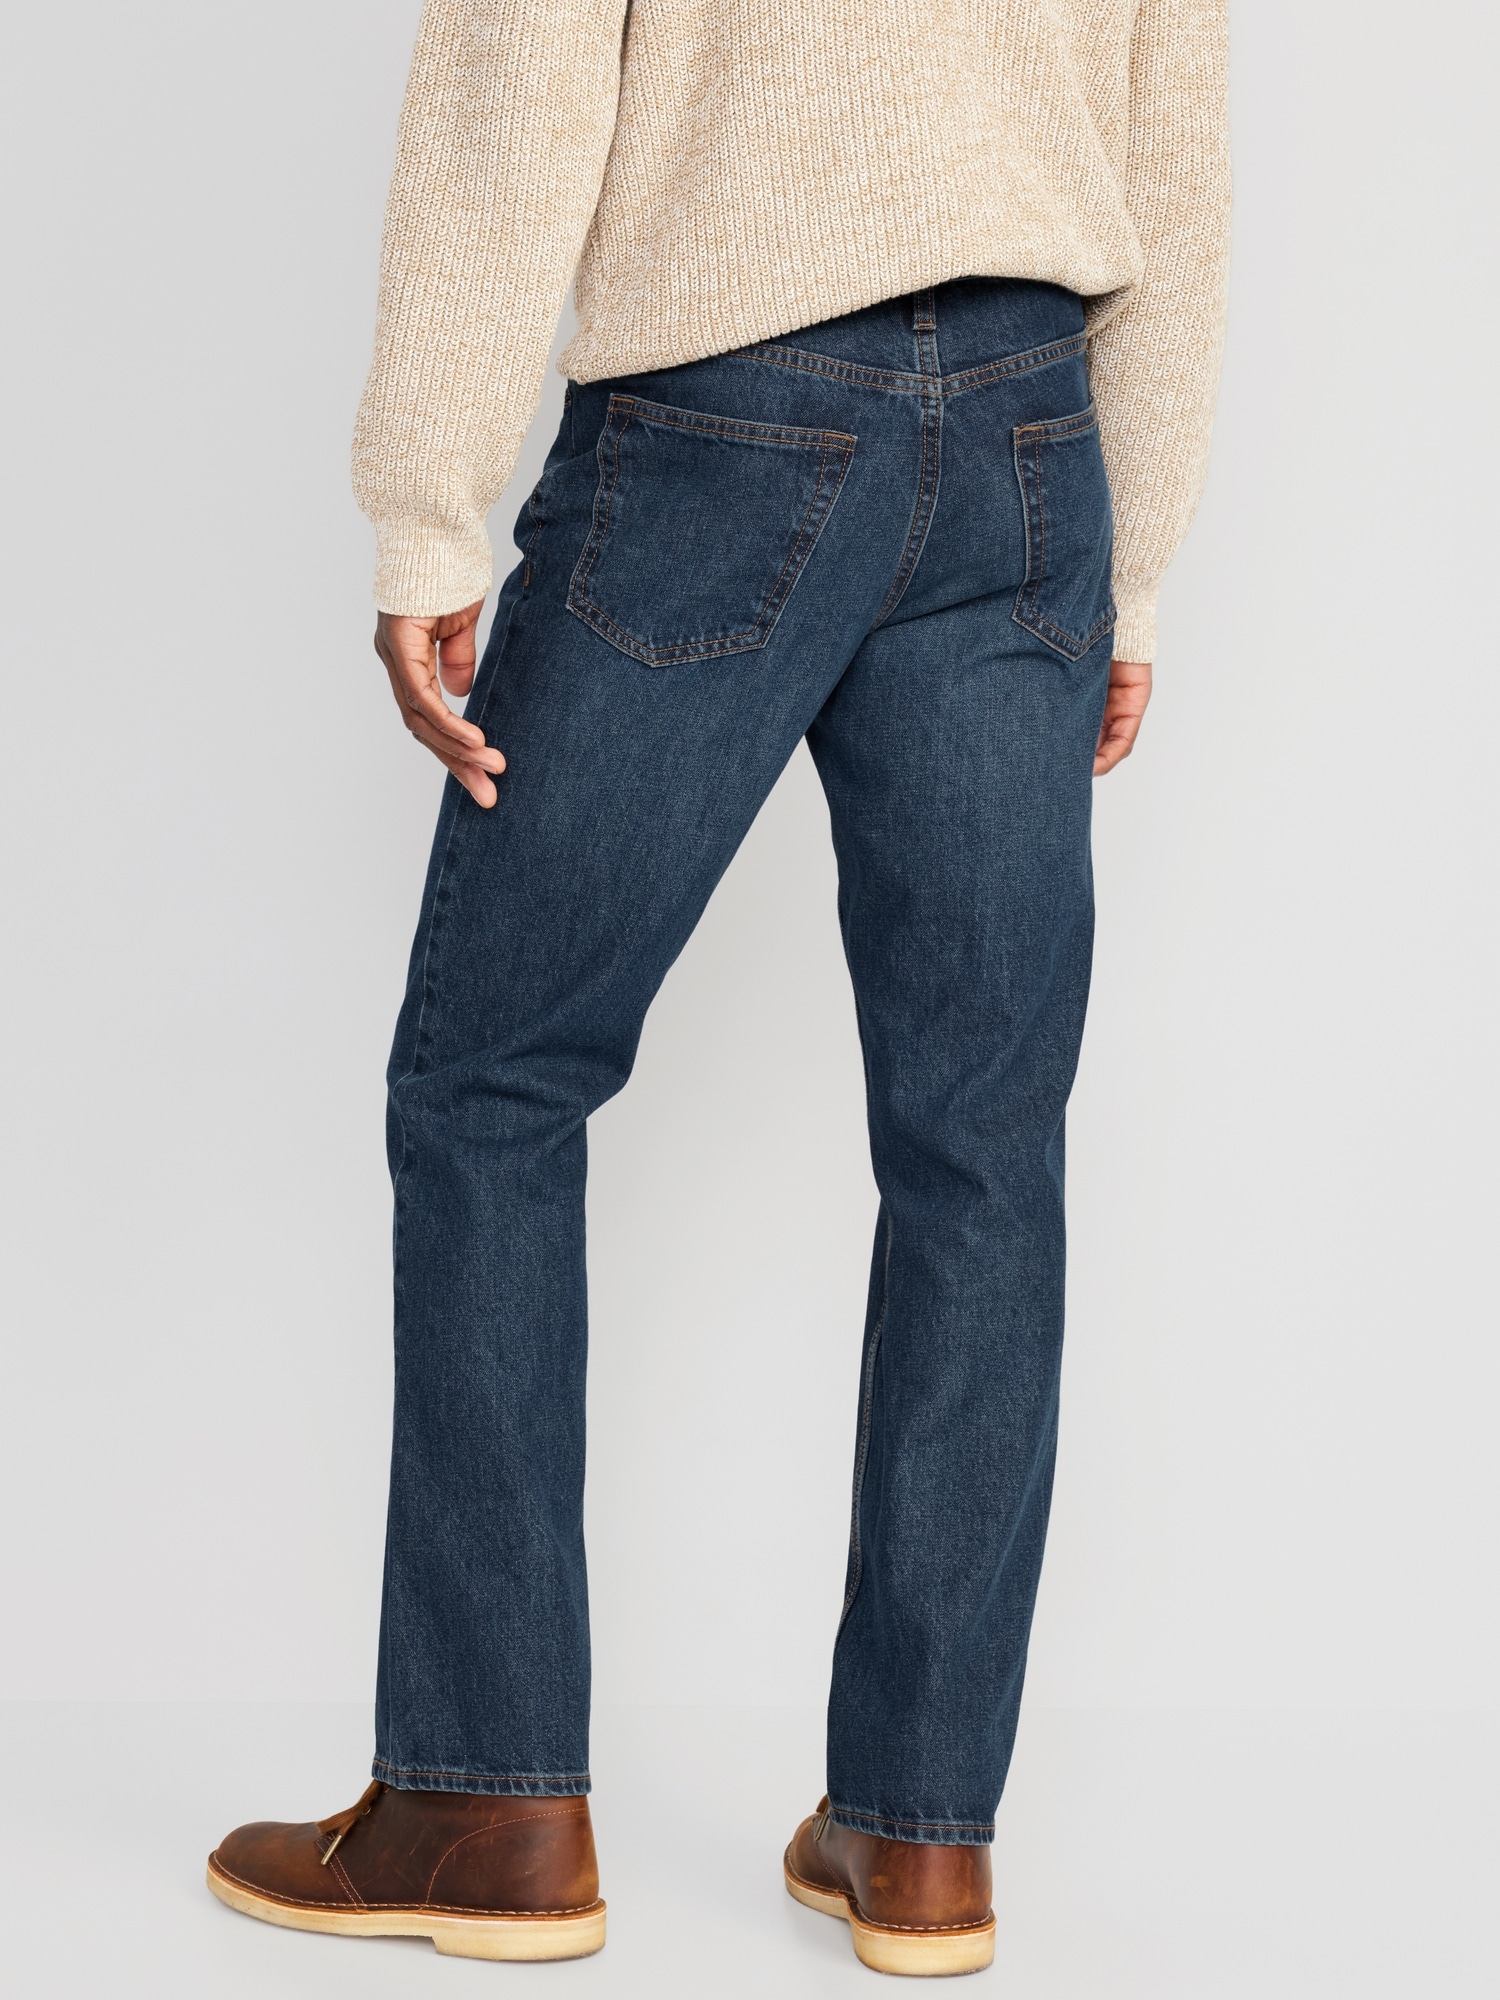 Wow Boot-Cut Non-Stretch Jeans | Old Navy